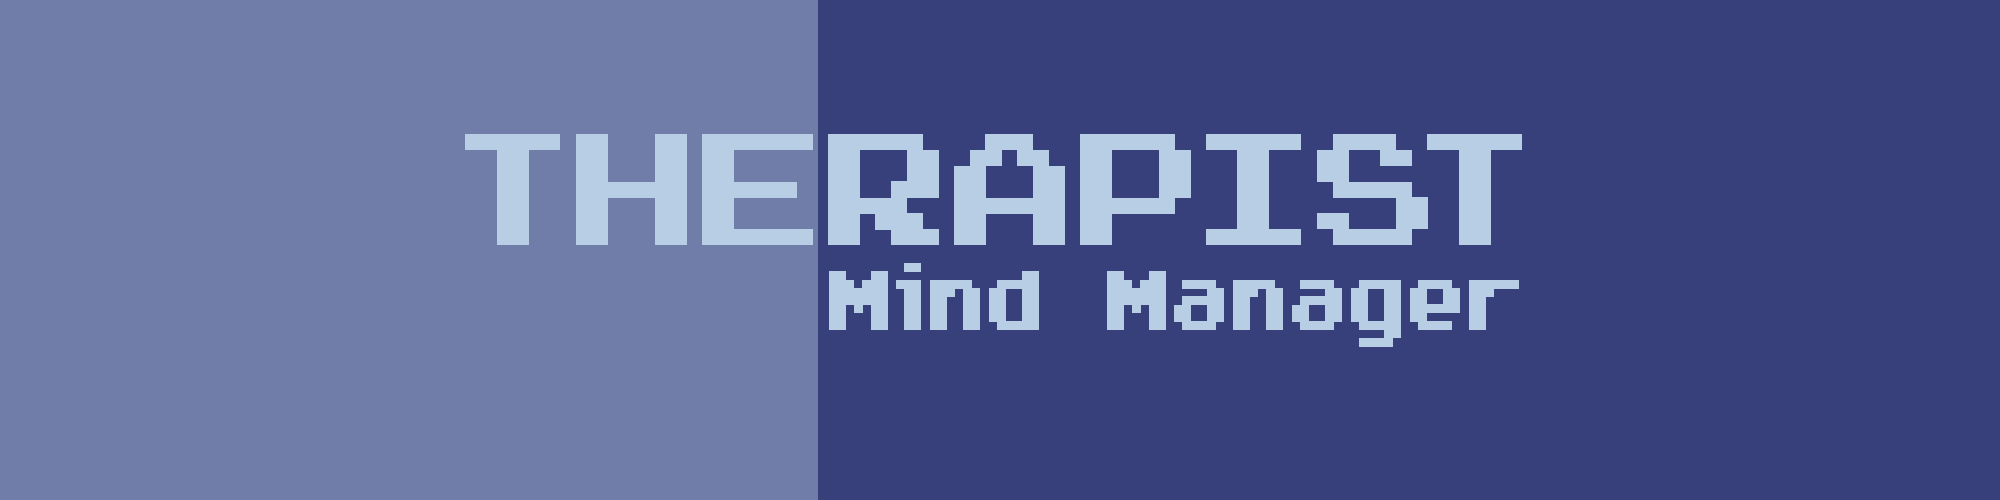 THERAPIST: Mind Manager